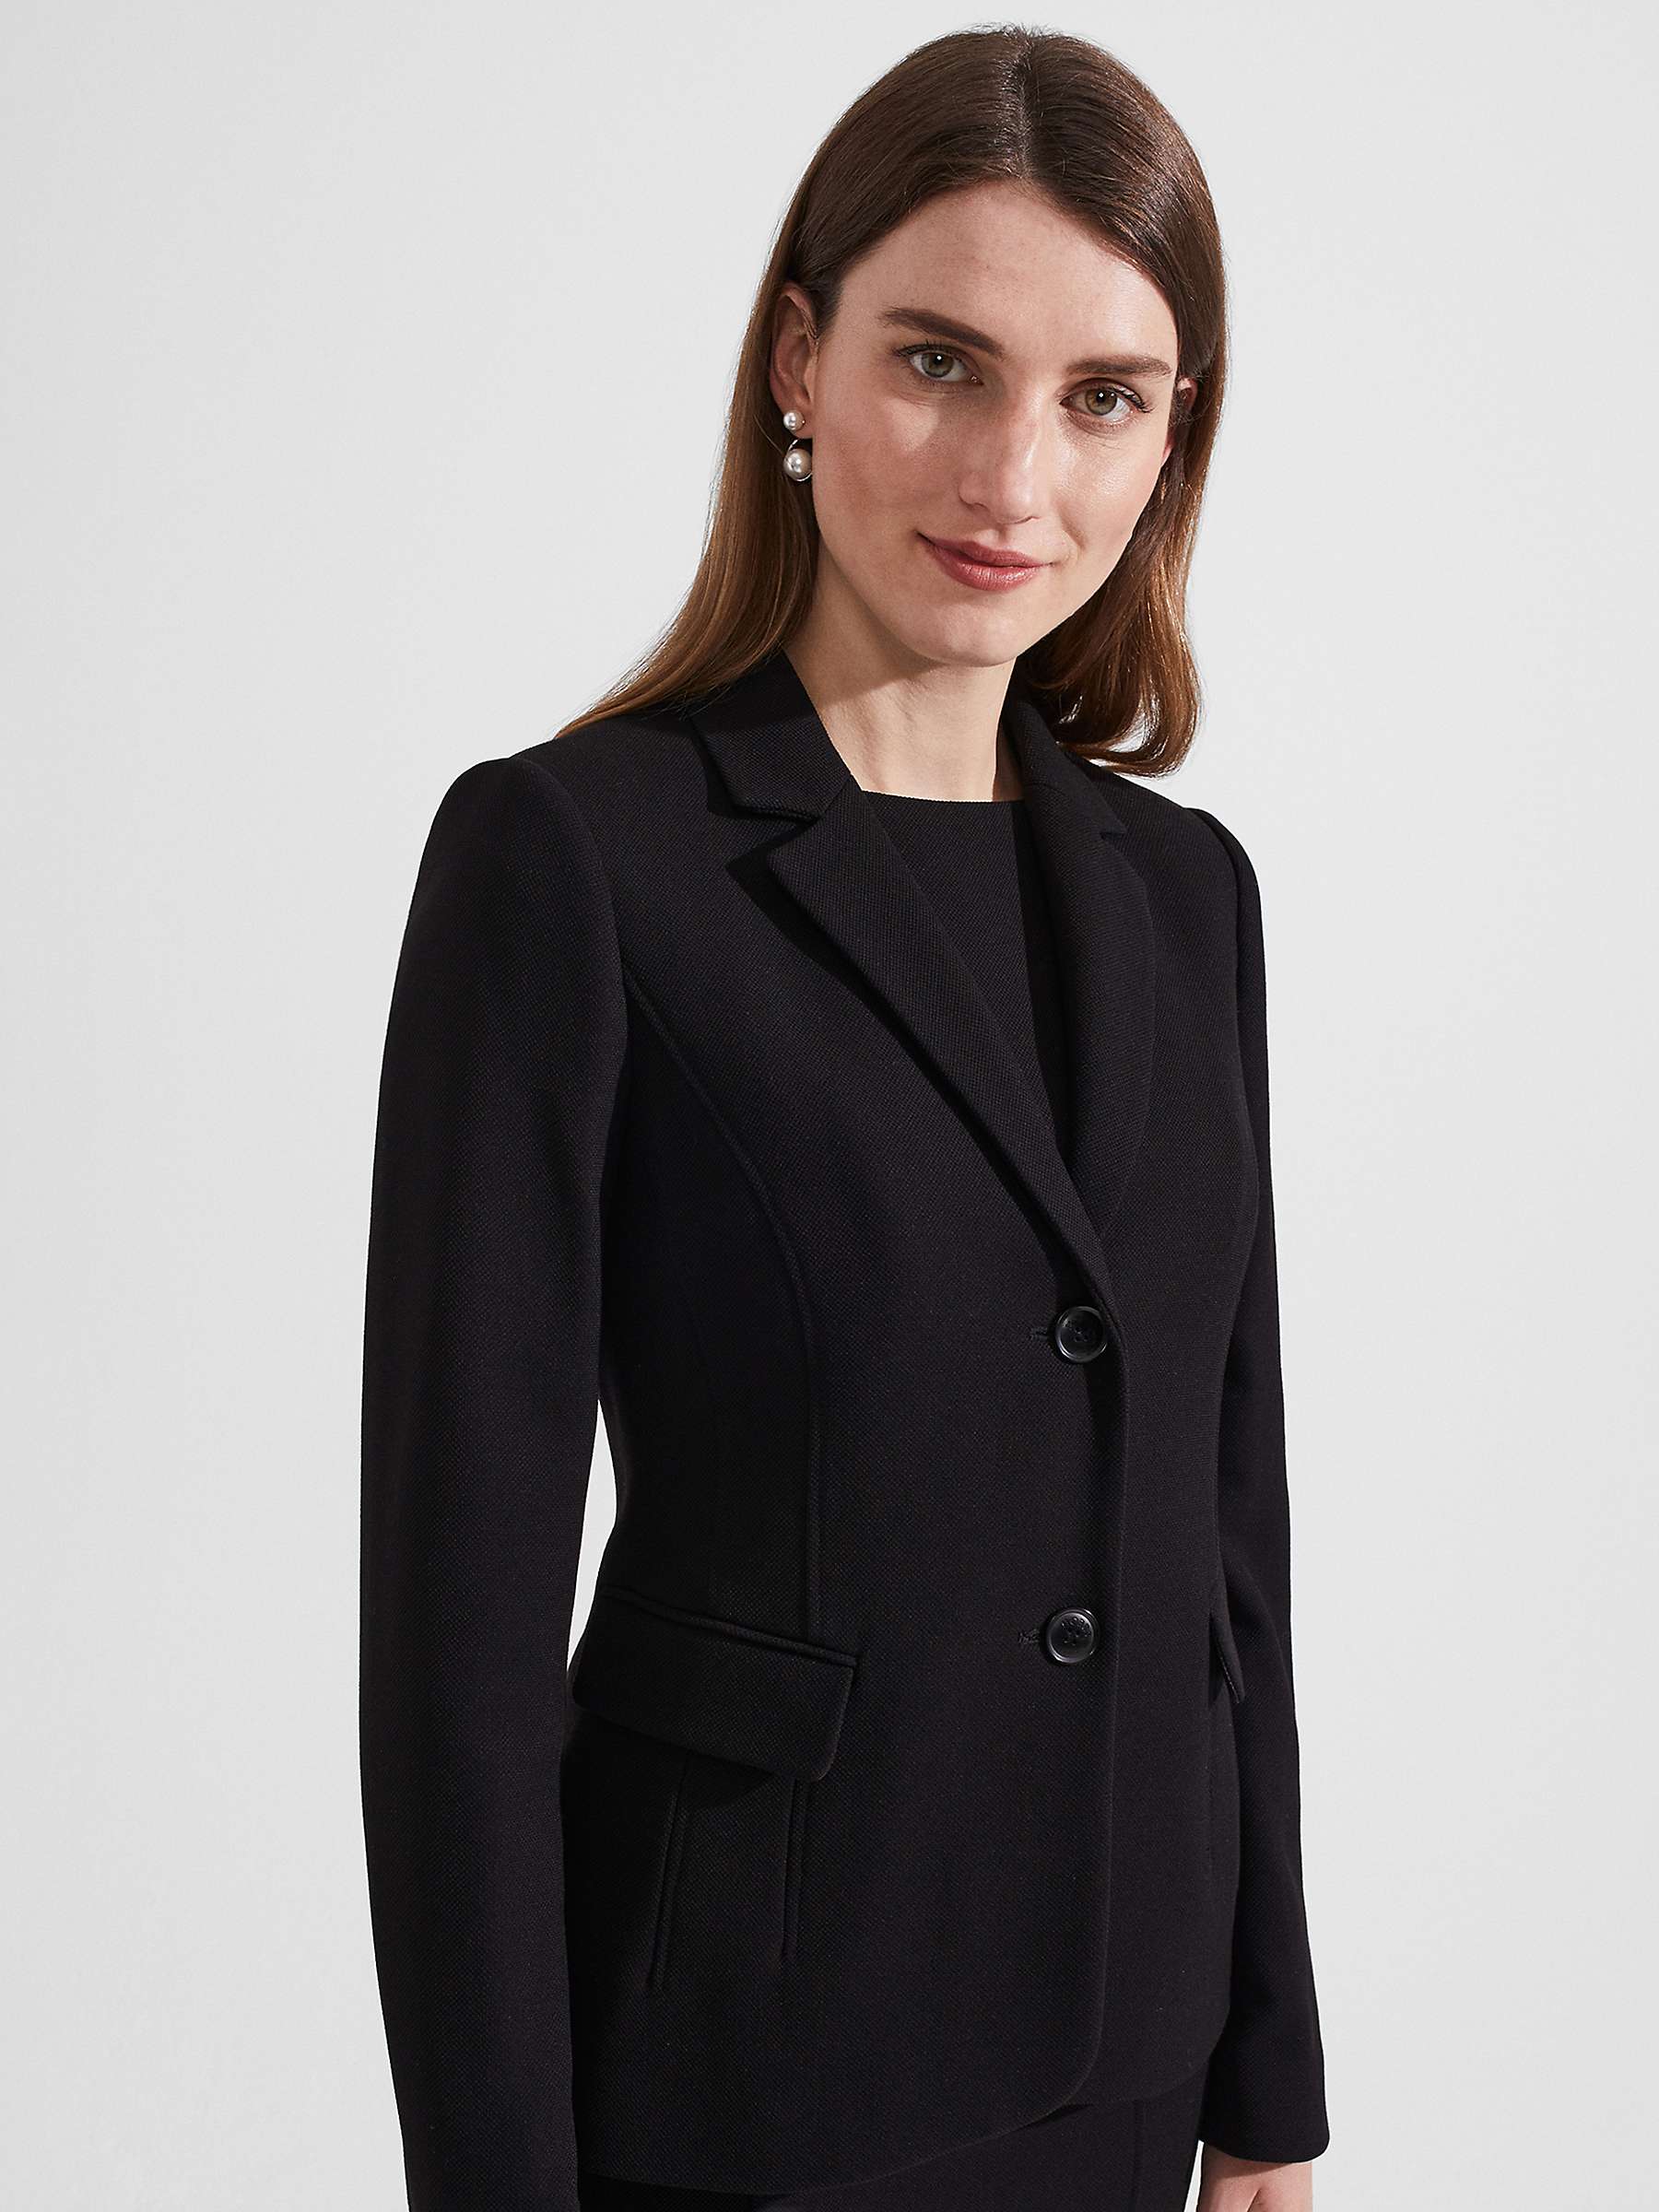 Hobbs Charley Contemporary Suit Jacket, Black at John Lewis & Partners